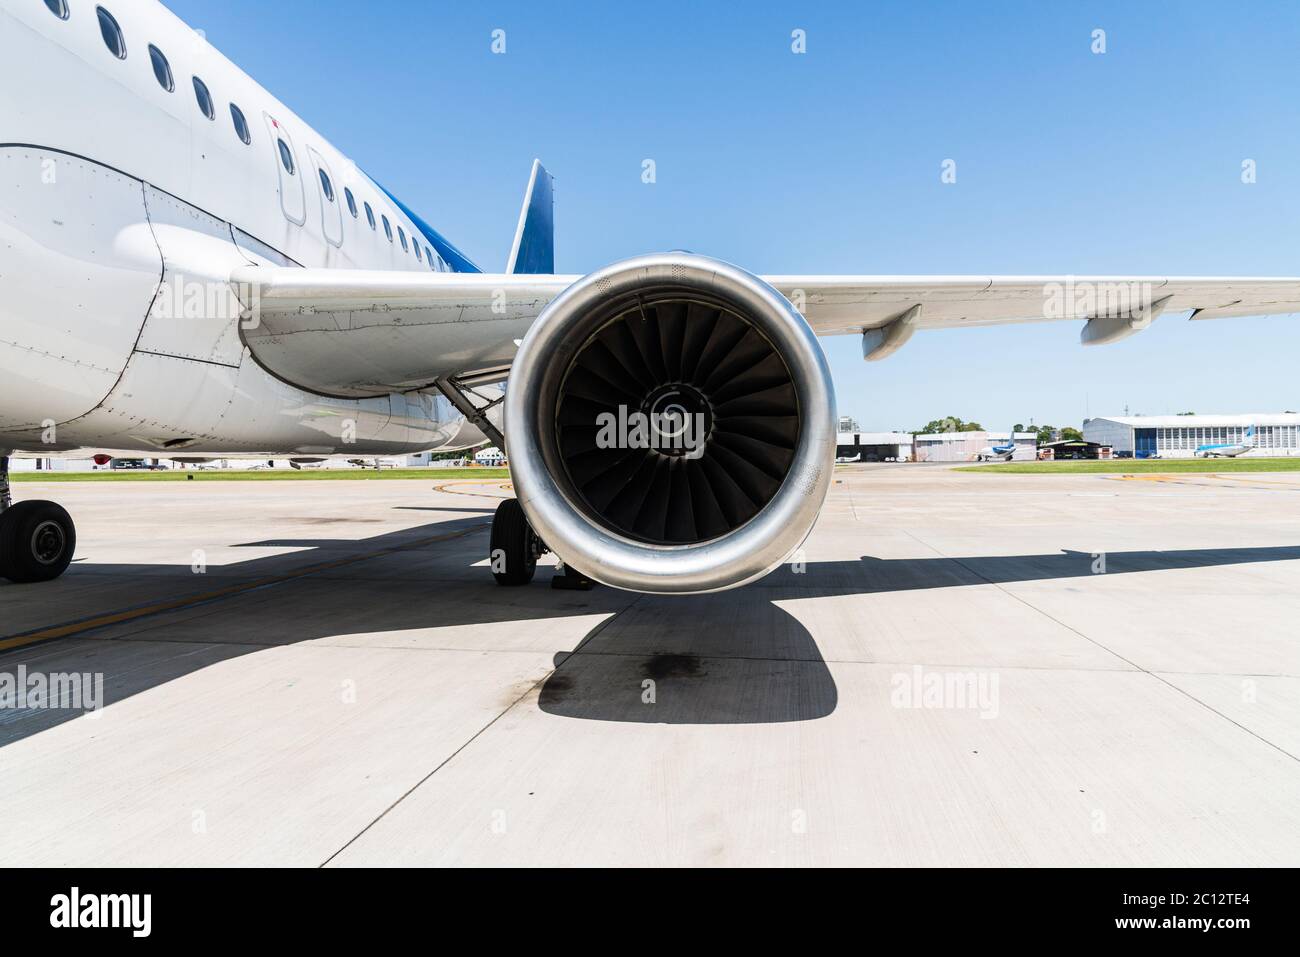 Engine and a wing of an aircraft plane at the airport. Stock Photo